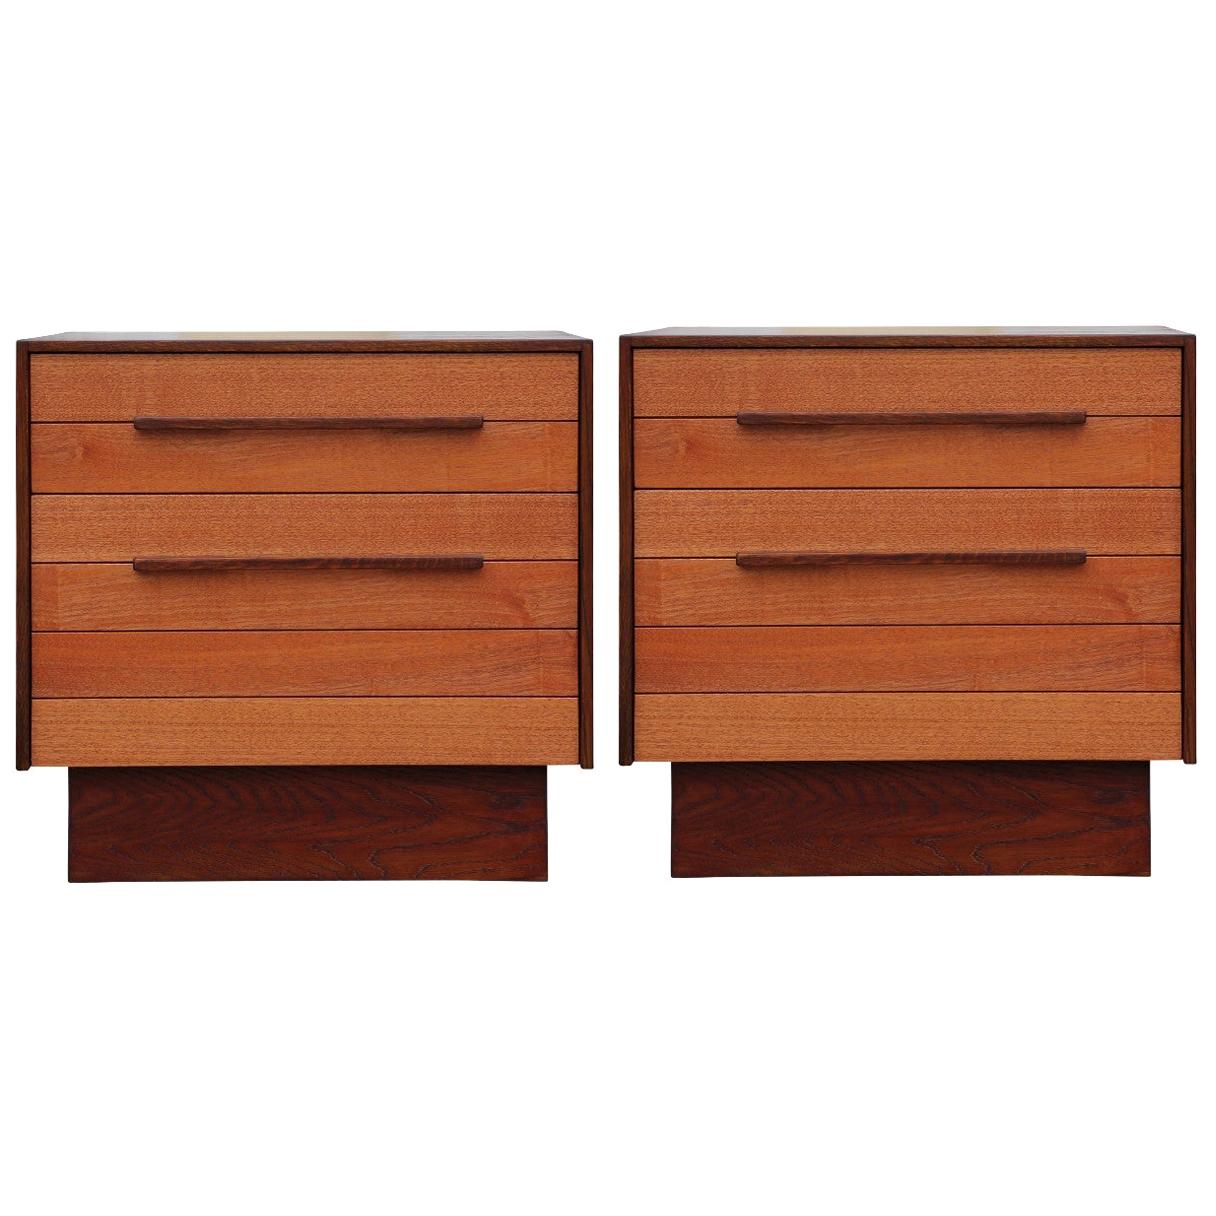 Pair of Modern Studio Made Two-Toned Solid Wood End Tables / Nightstands